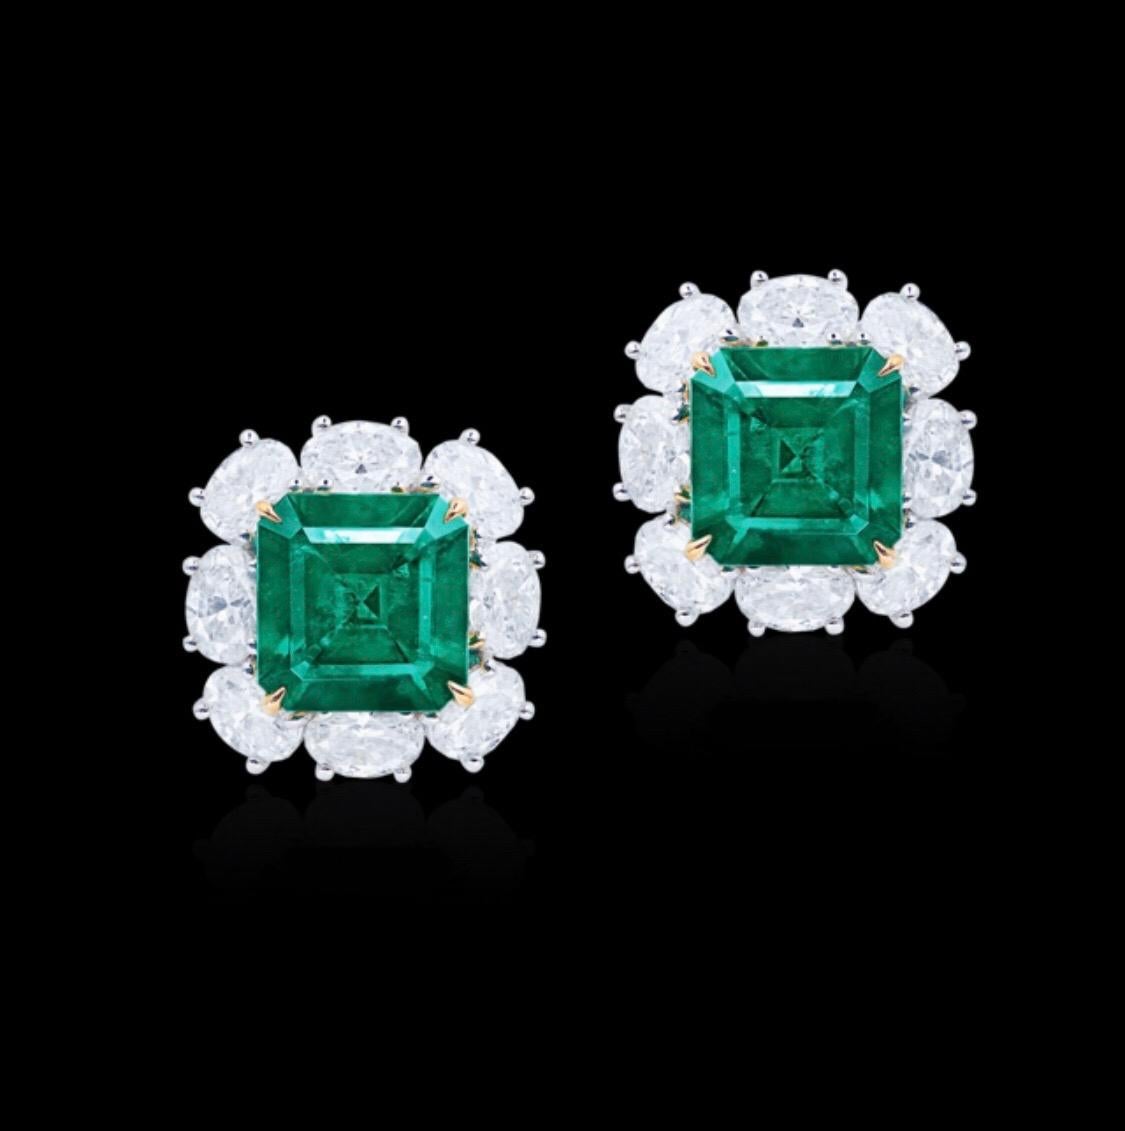 From the Emilio Jewelry Museum Vault, We are Showcasing a stunning pair of 6.00 carat total weight untreated no oil emerald earrings. The diamonds are exceptional and clean. No oil Colombian vivid green Muzo emeralds are extremely rare making up for